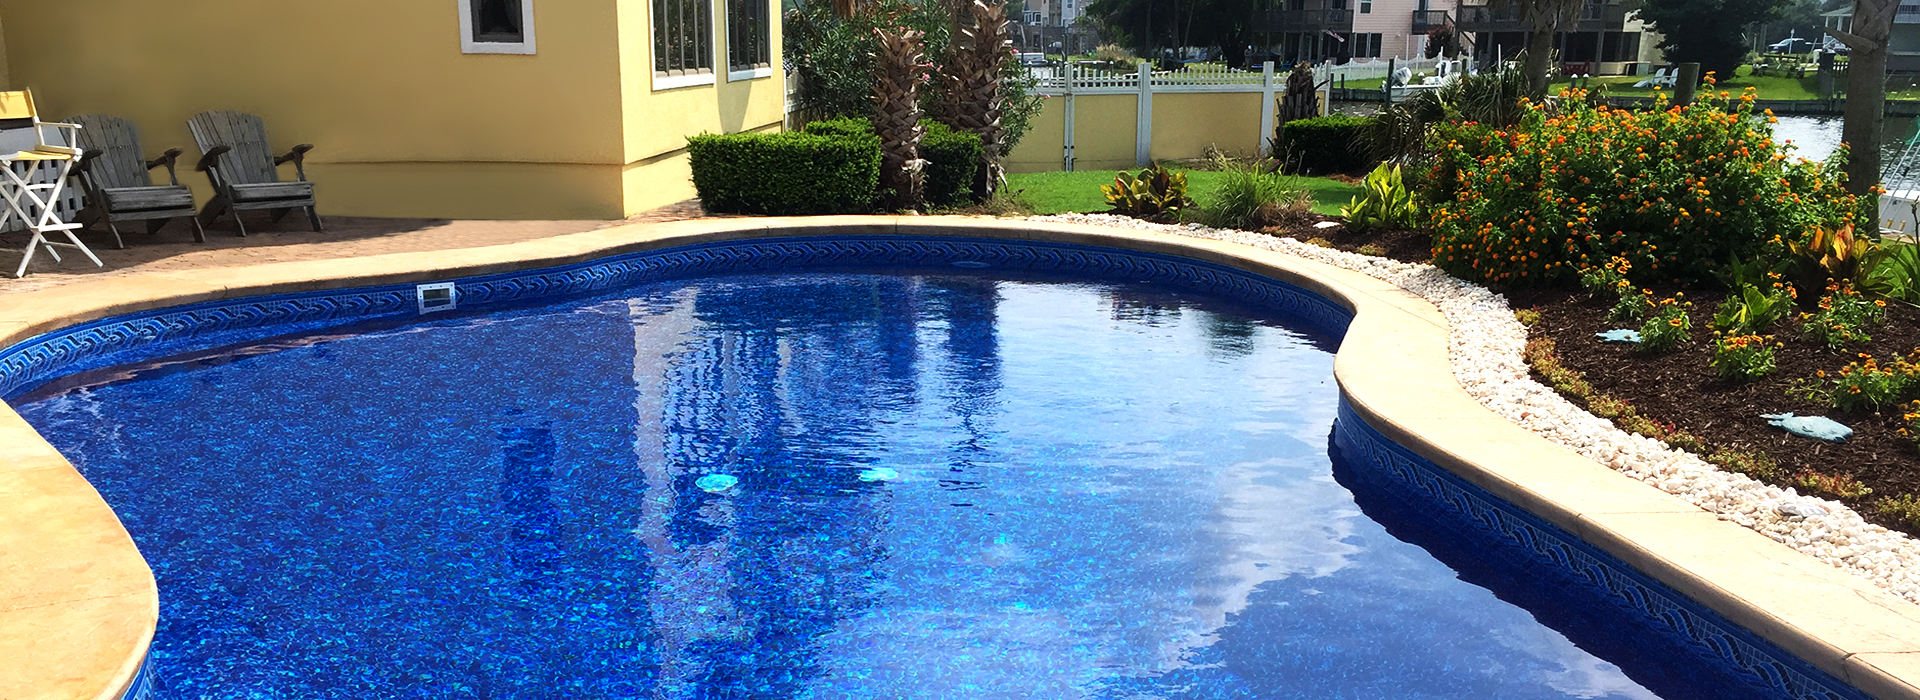 AquaDoc Pool & Spa Services Outer Banks